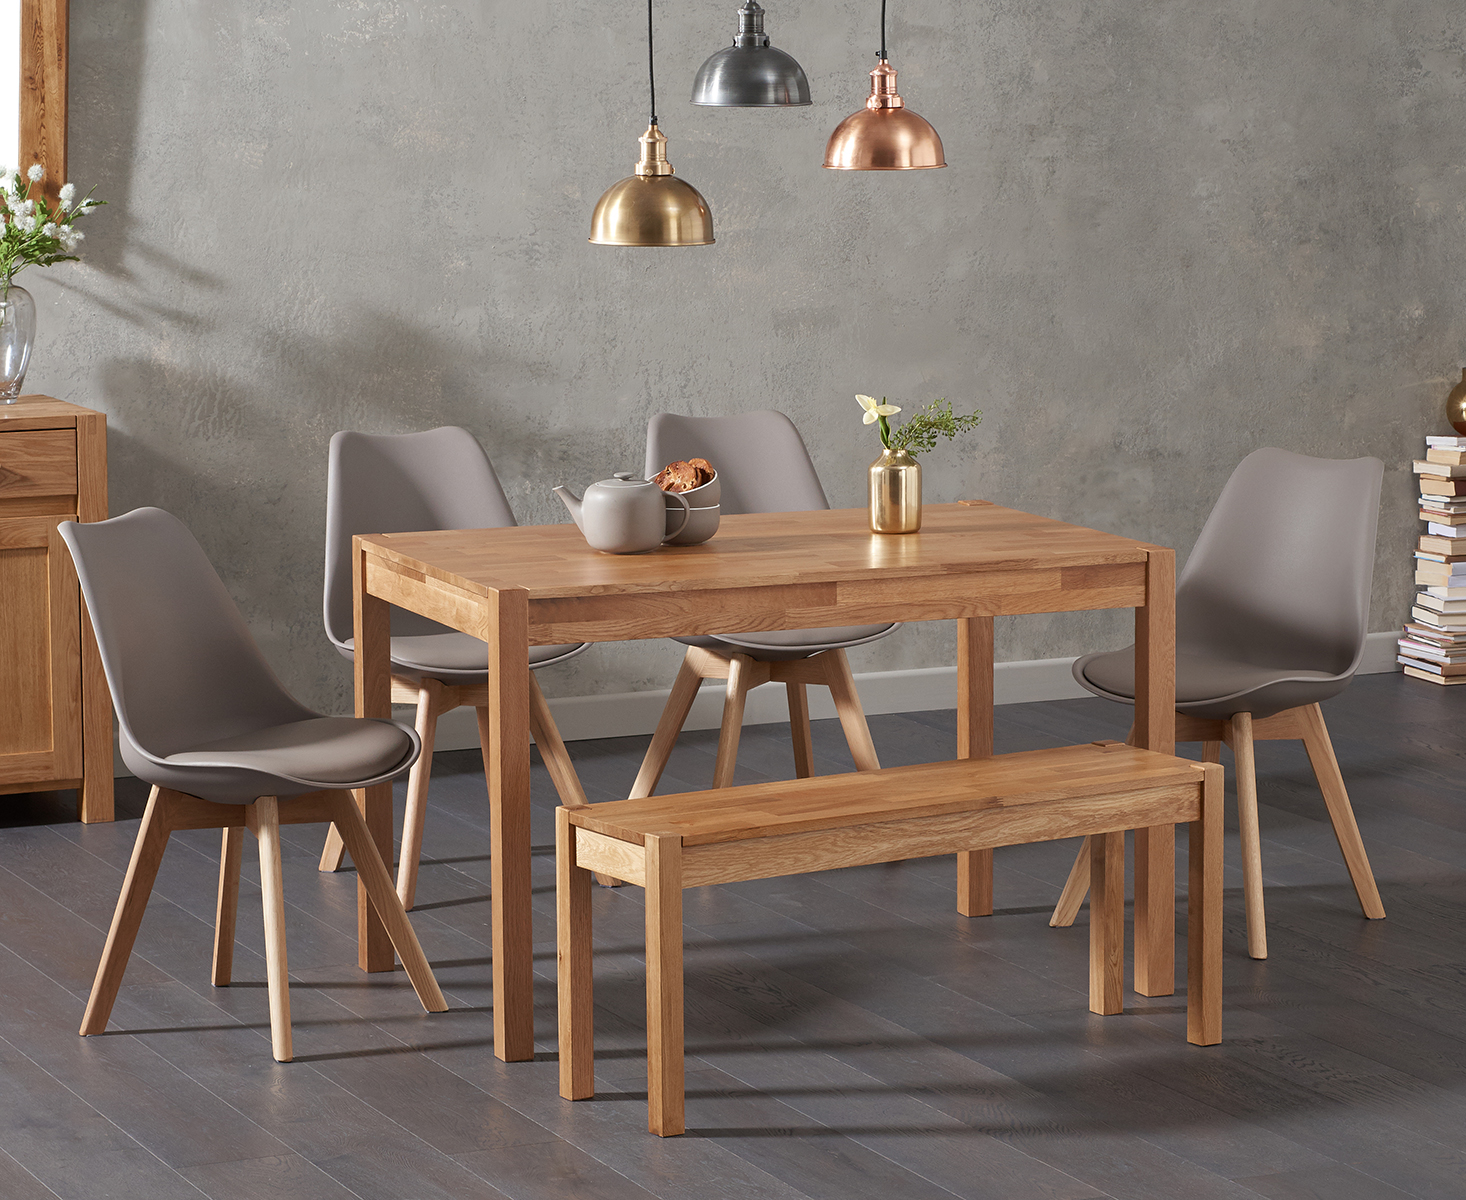 Oxford 120cm Solid Oak Dining Table With Orson Faux Leather Chairs And Oxford Bench